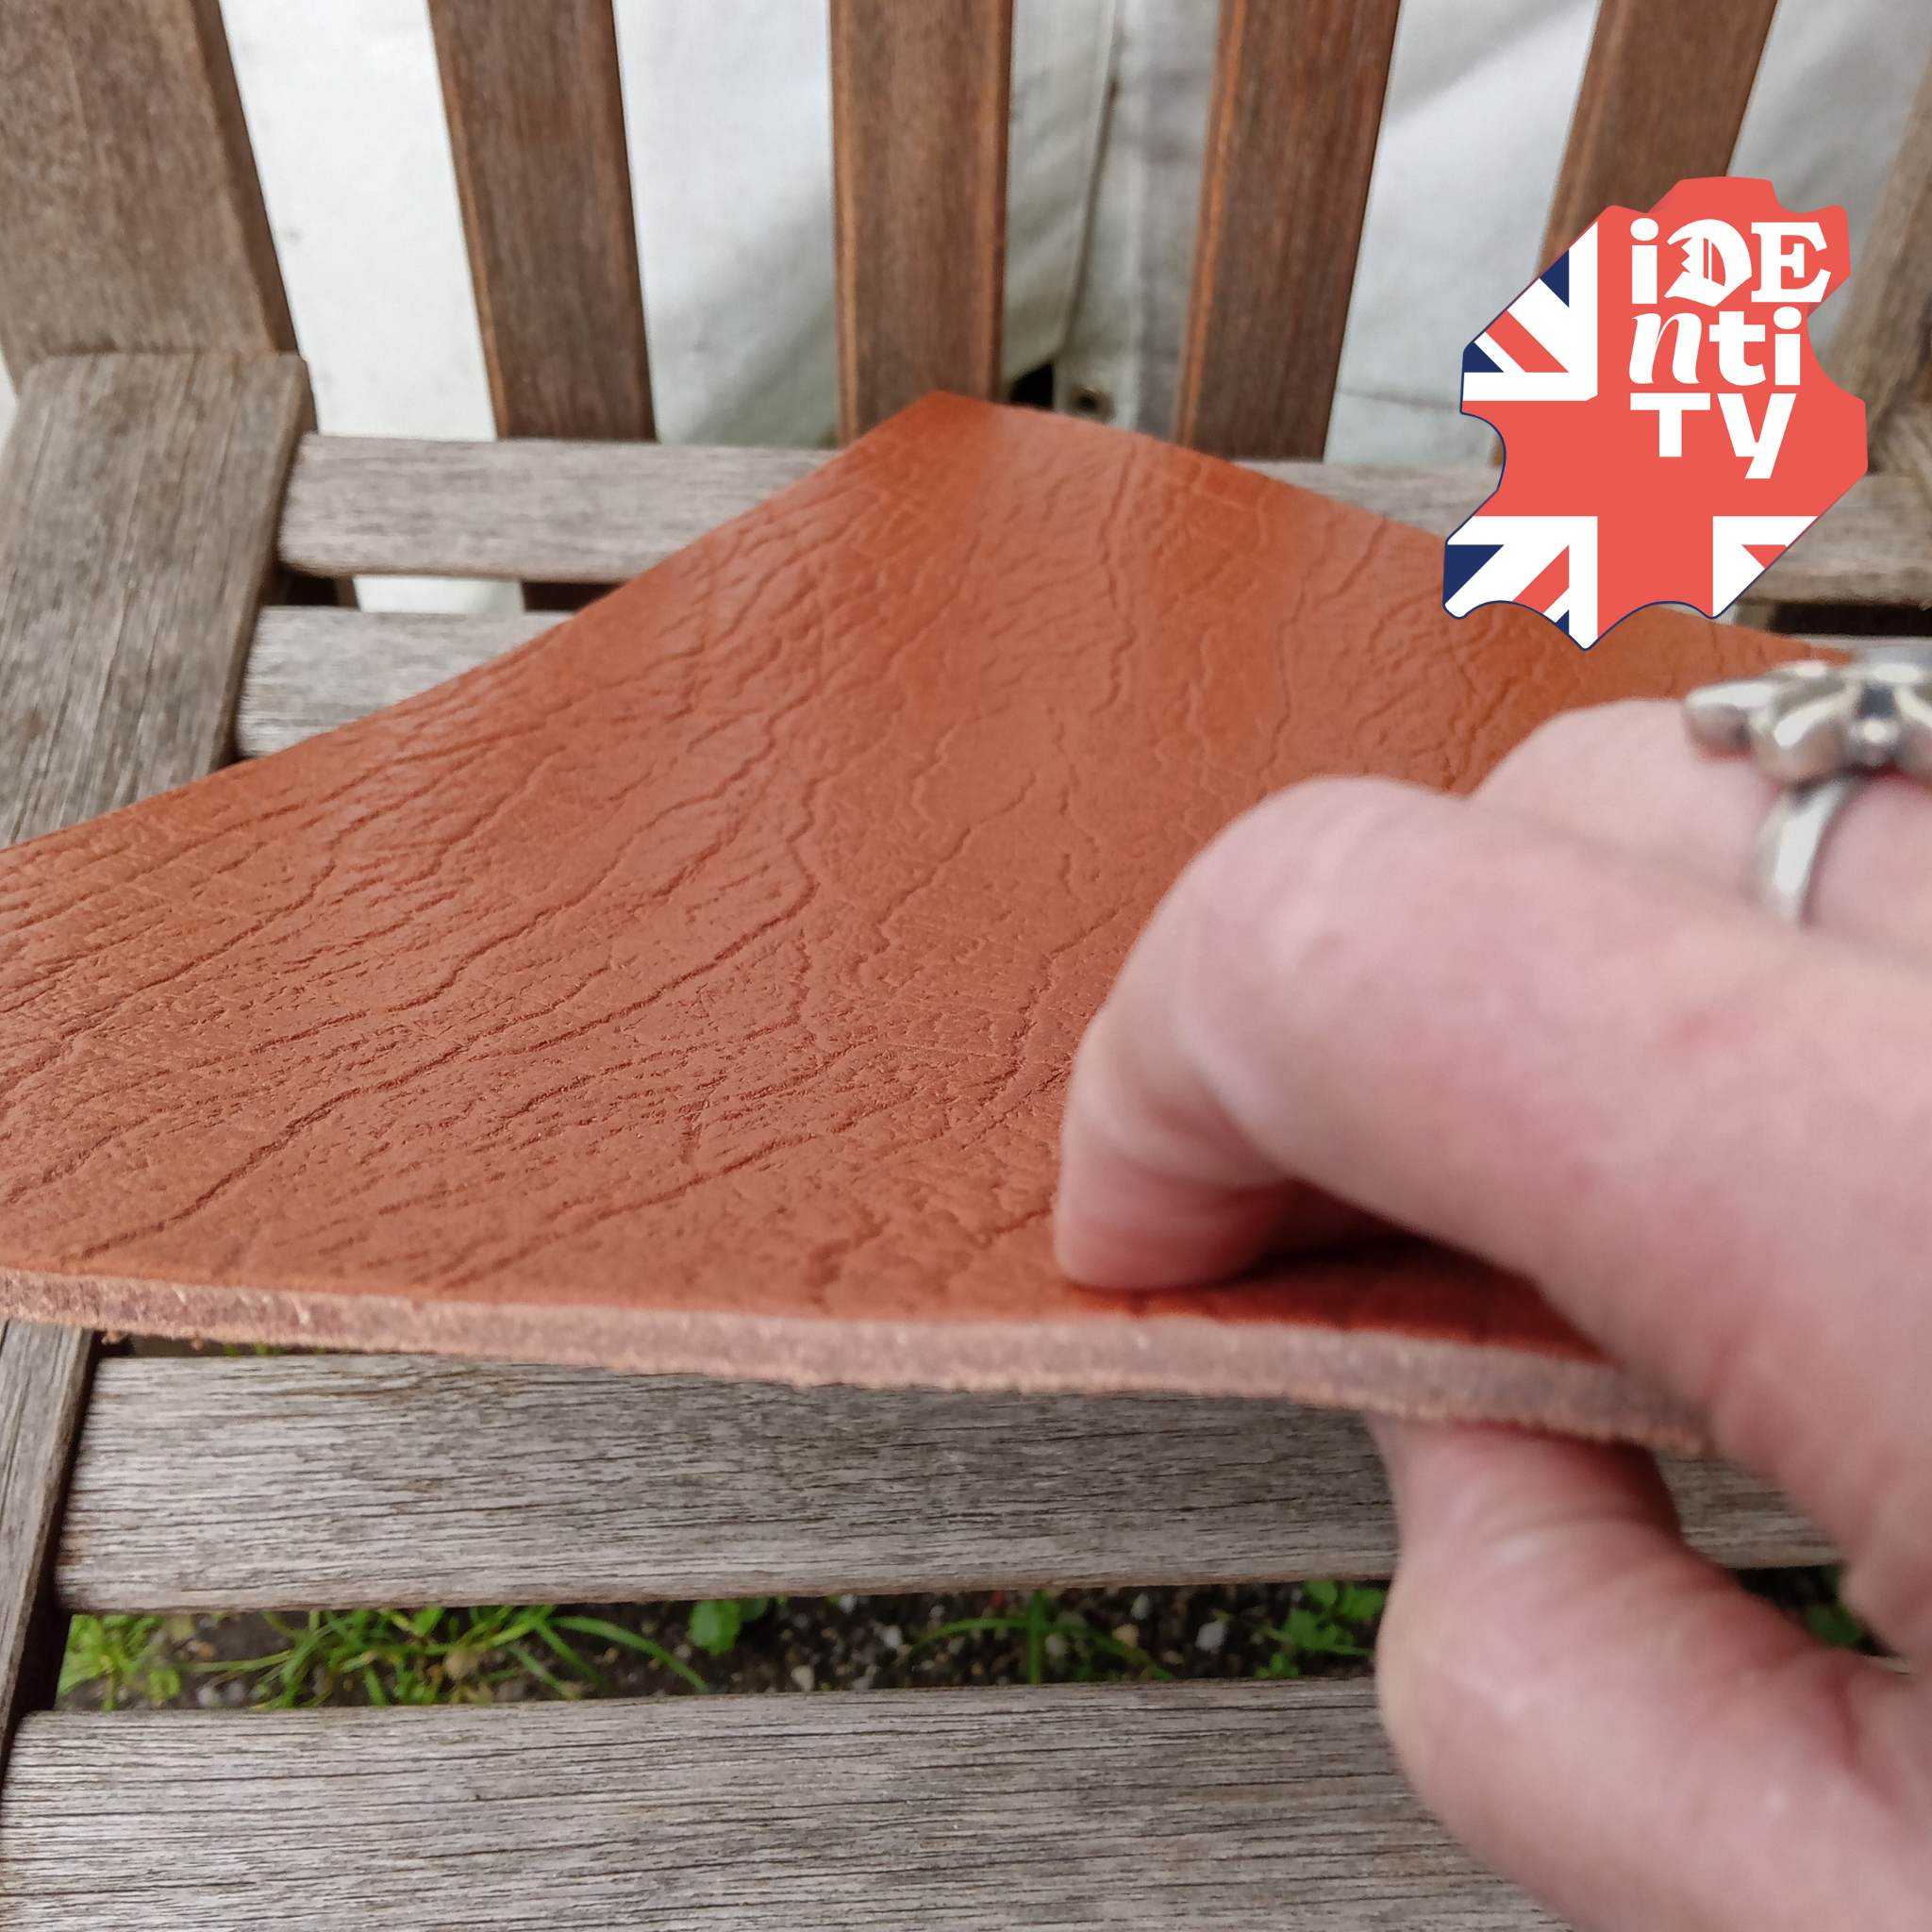 A3 cuts taken from the Heritage collection of leather sourced from the old Clayton's tannery in Chesterfield. Tan Coloured Textured Grain Leather - around 3-4mm   USES: knife/tool sheaths, arm-guards, straps, collars